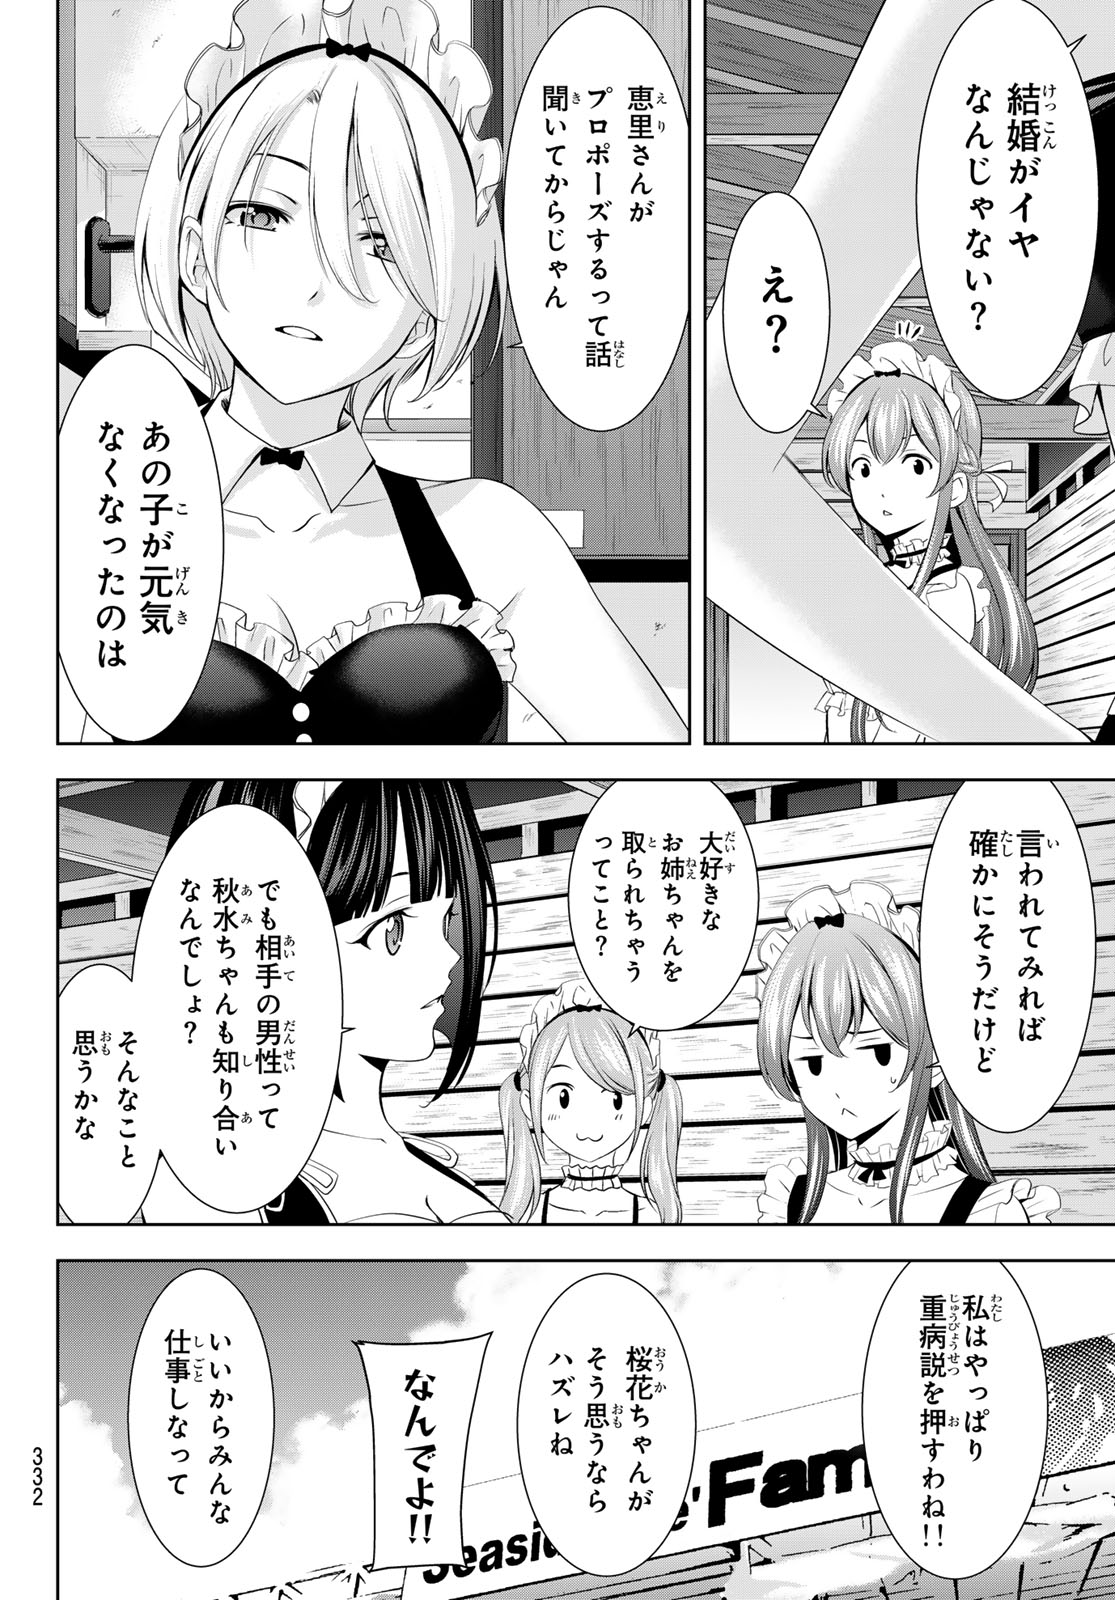 Megami no Cafe Terace - Chapter 152 - Page 10